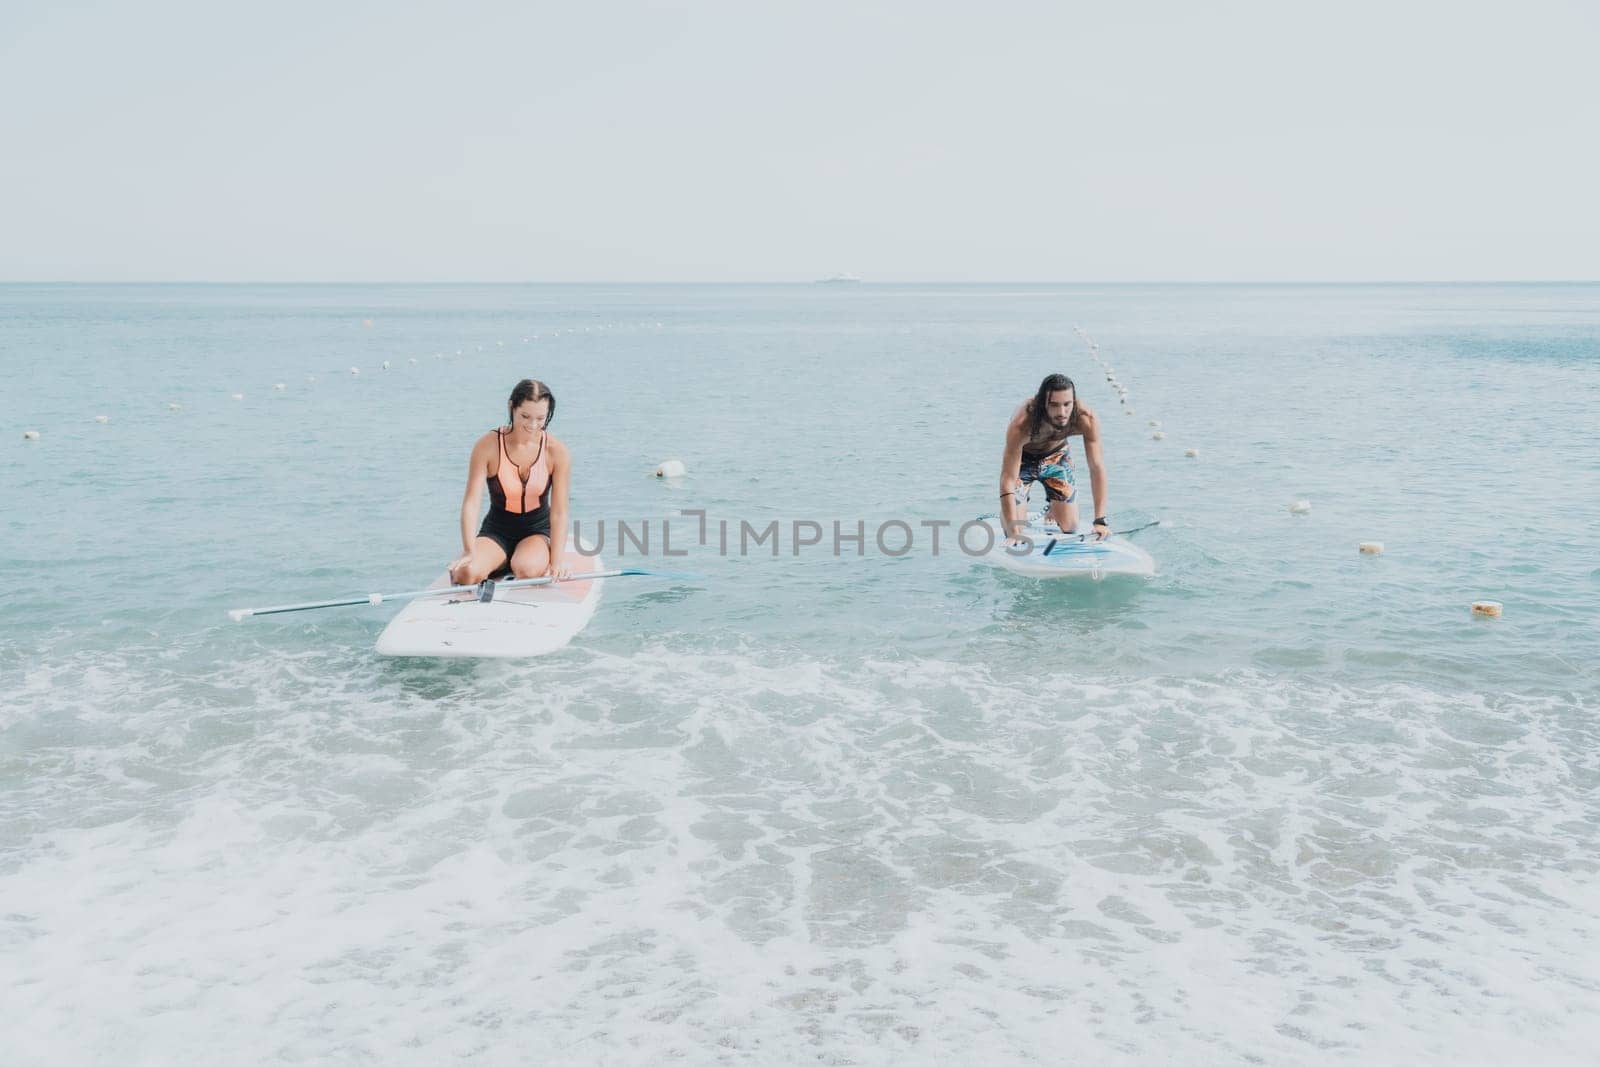 Woman man sea sup. Close up portrait of beautiful young caucasian woman with black hair and freckles looking at camera and smiling. Cute woman portrait in a pink bikini posing on sup board in the sea